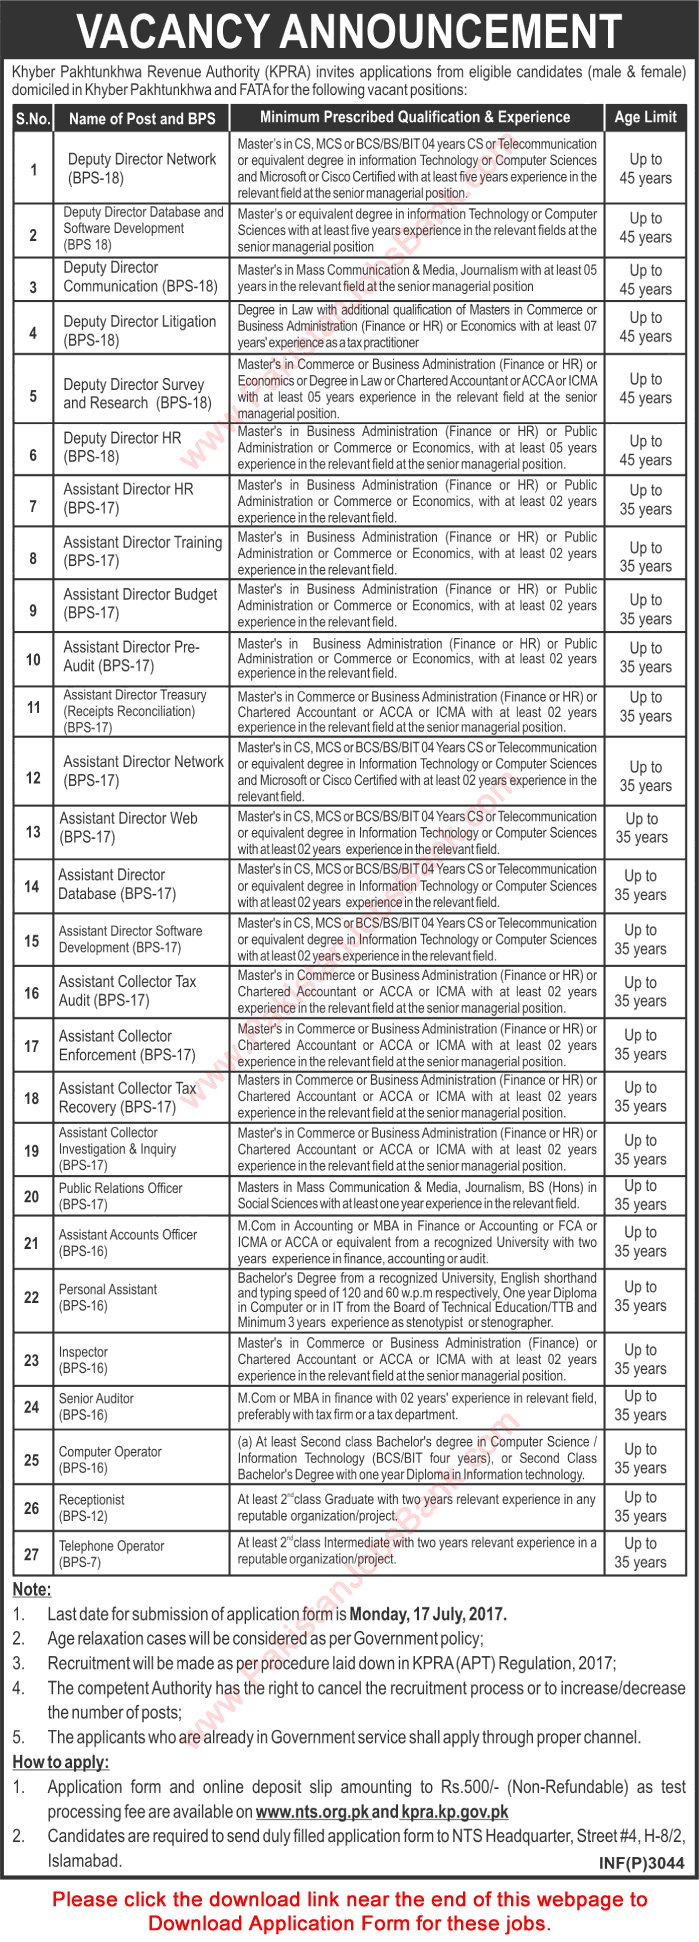 Khyber Pakhtunkhwa Revenue Authority Jobs 2017 June NTS Application Form Download Latest